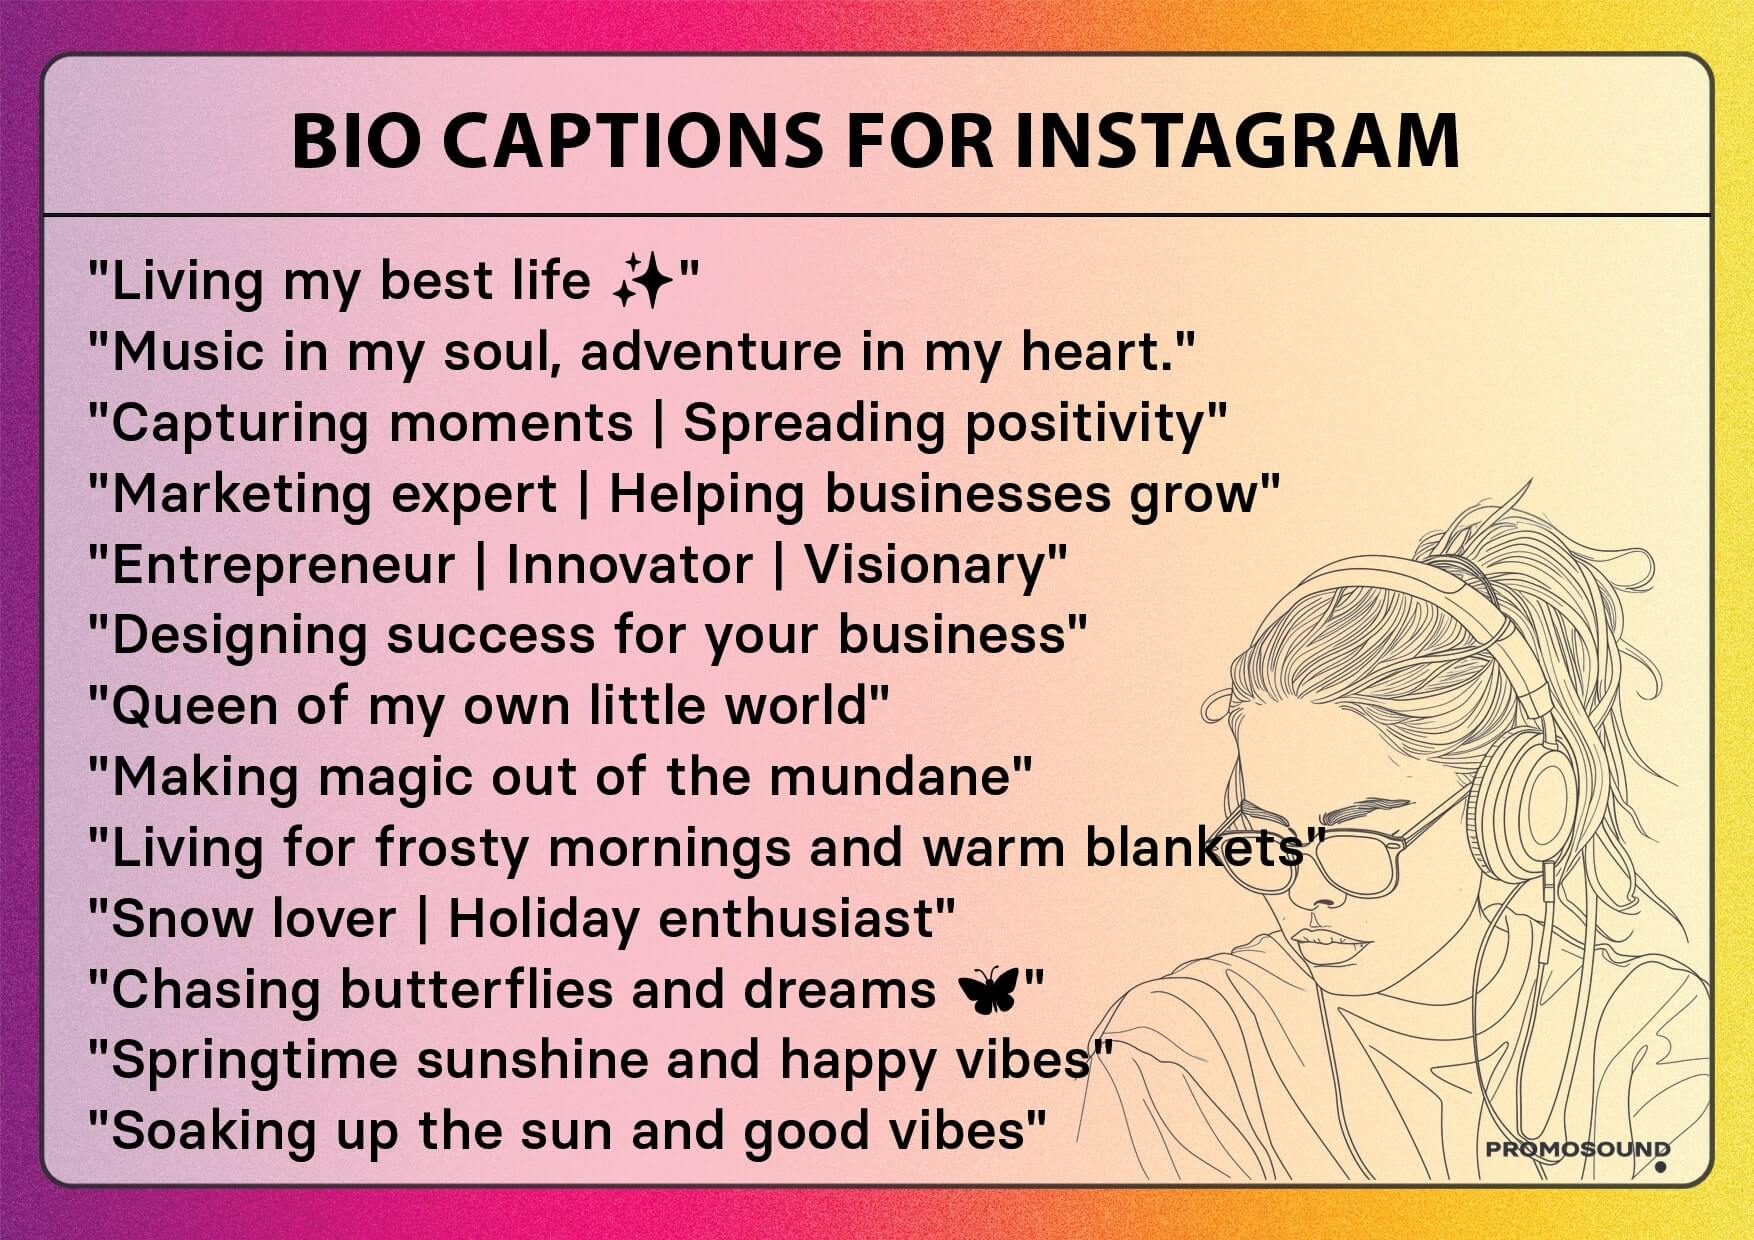 Image featuring 10 Instagram bio captions with a sleek and modern background. Captions are elegantly displayed, each accompanied by icons such as pens, profile icons, and hashtags, capturing the essence of personal branding, self-expression, and impactful introductions perfect for any Instagram bio.